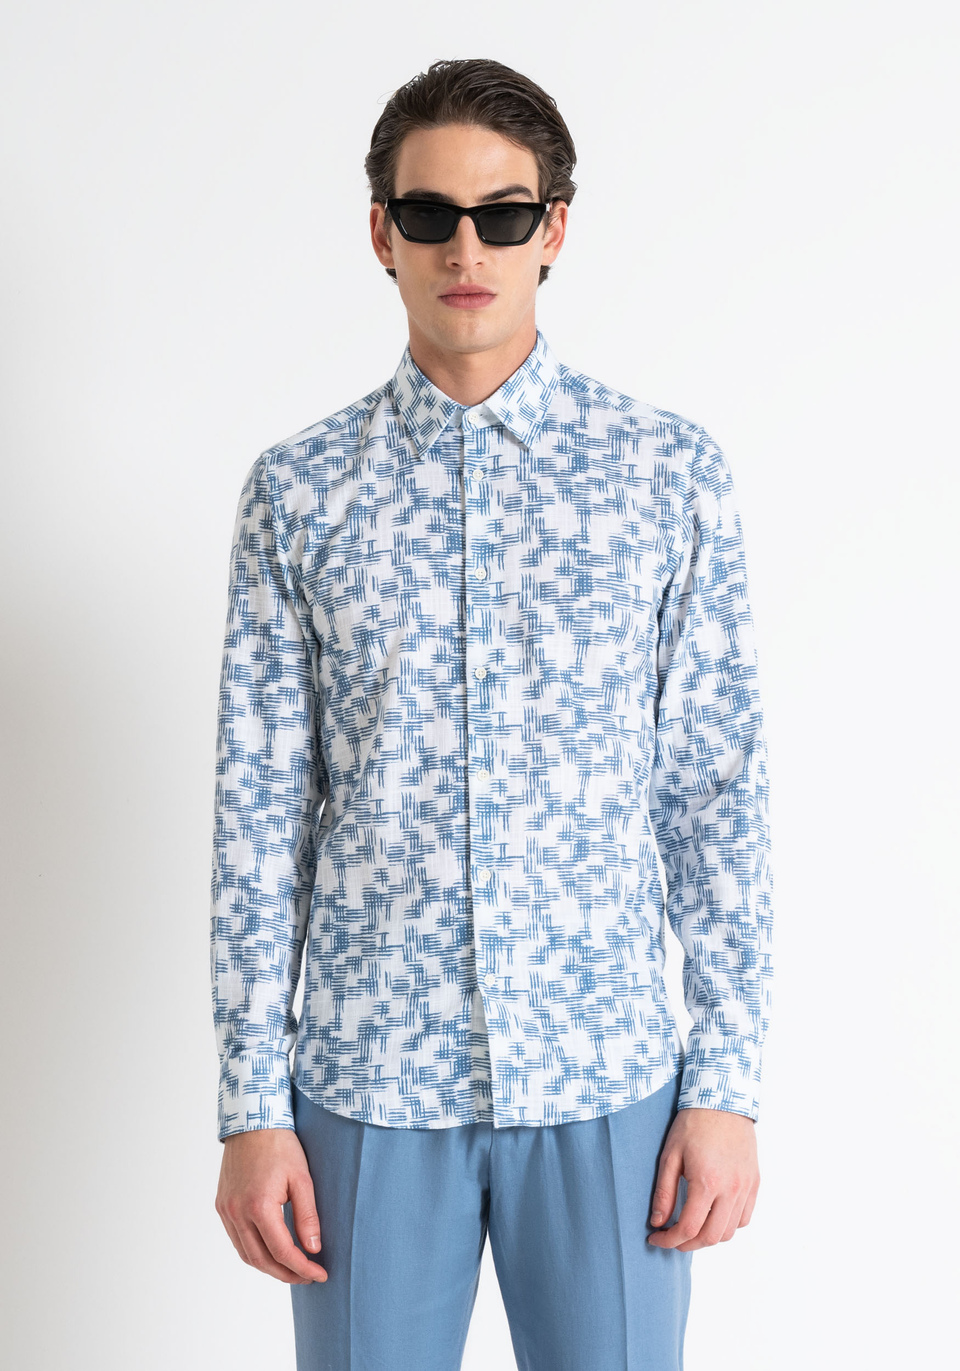 "NAPOLI" SLIM FIT SHIRT IN FLAMED PRINTED COTTON - Antony Morato Online Shop